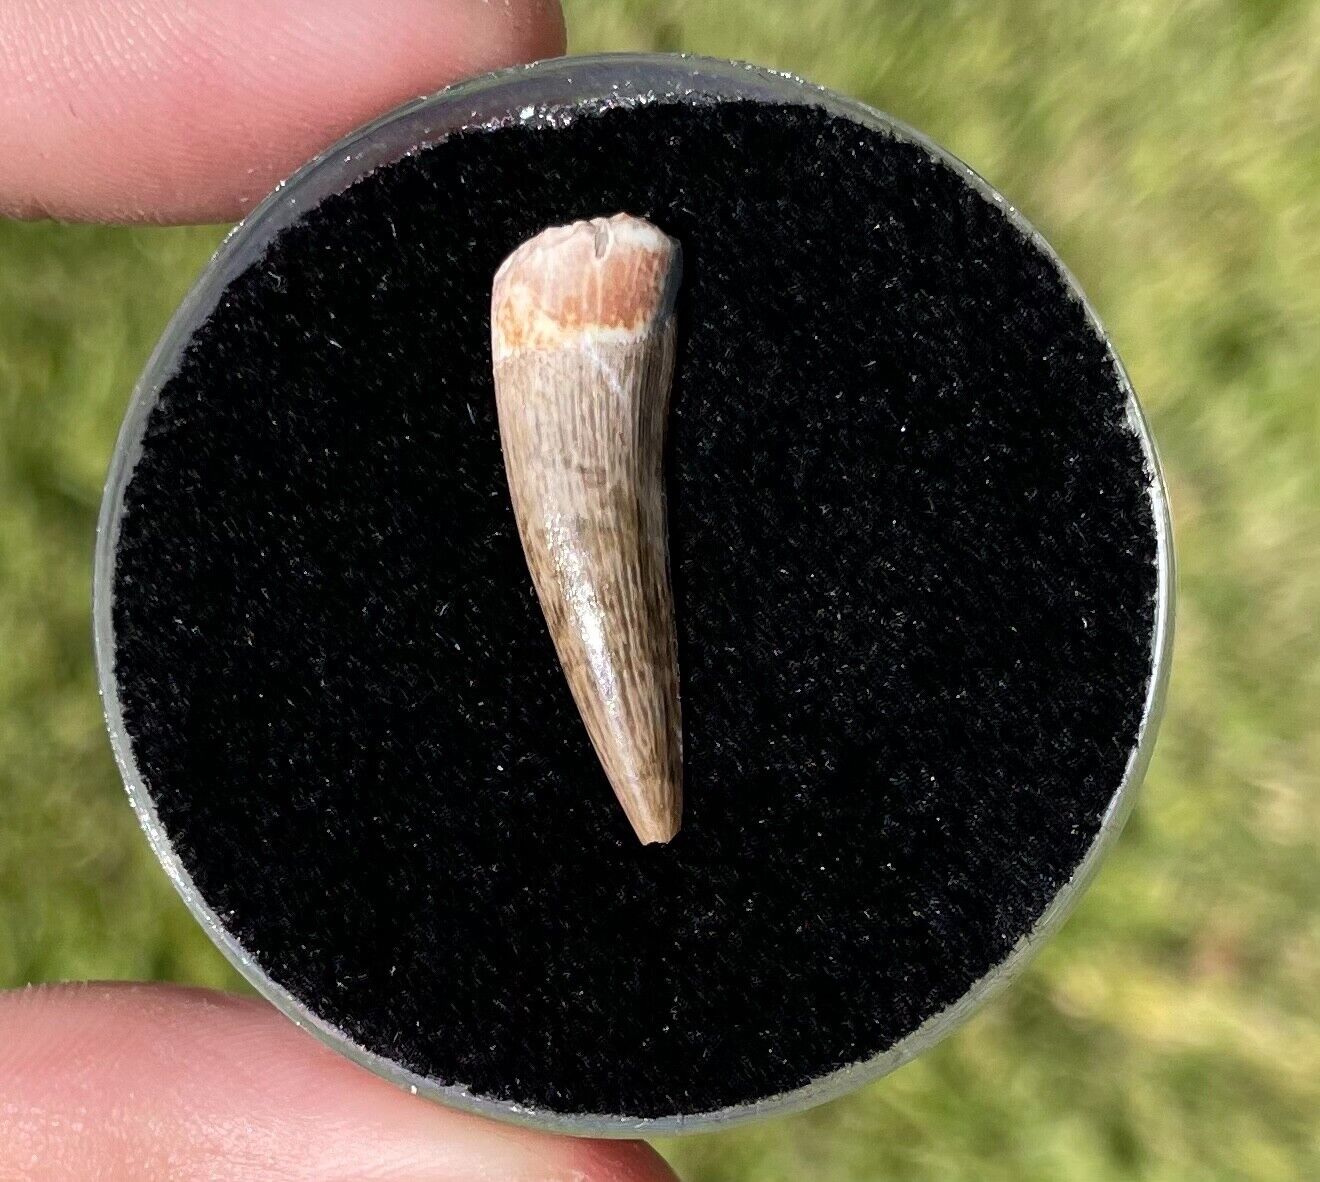 Texas Fossil Phytosaur Tooth RARE Triassic Dinosaur Tooth in Display Case